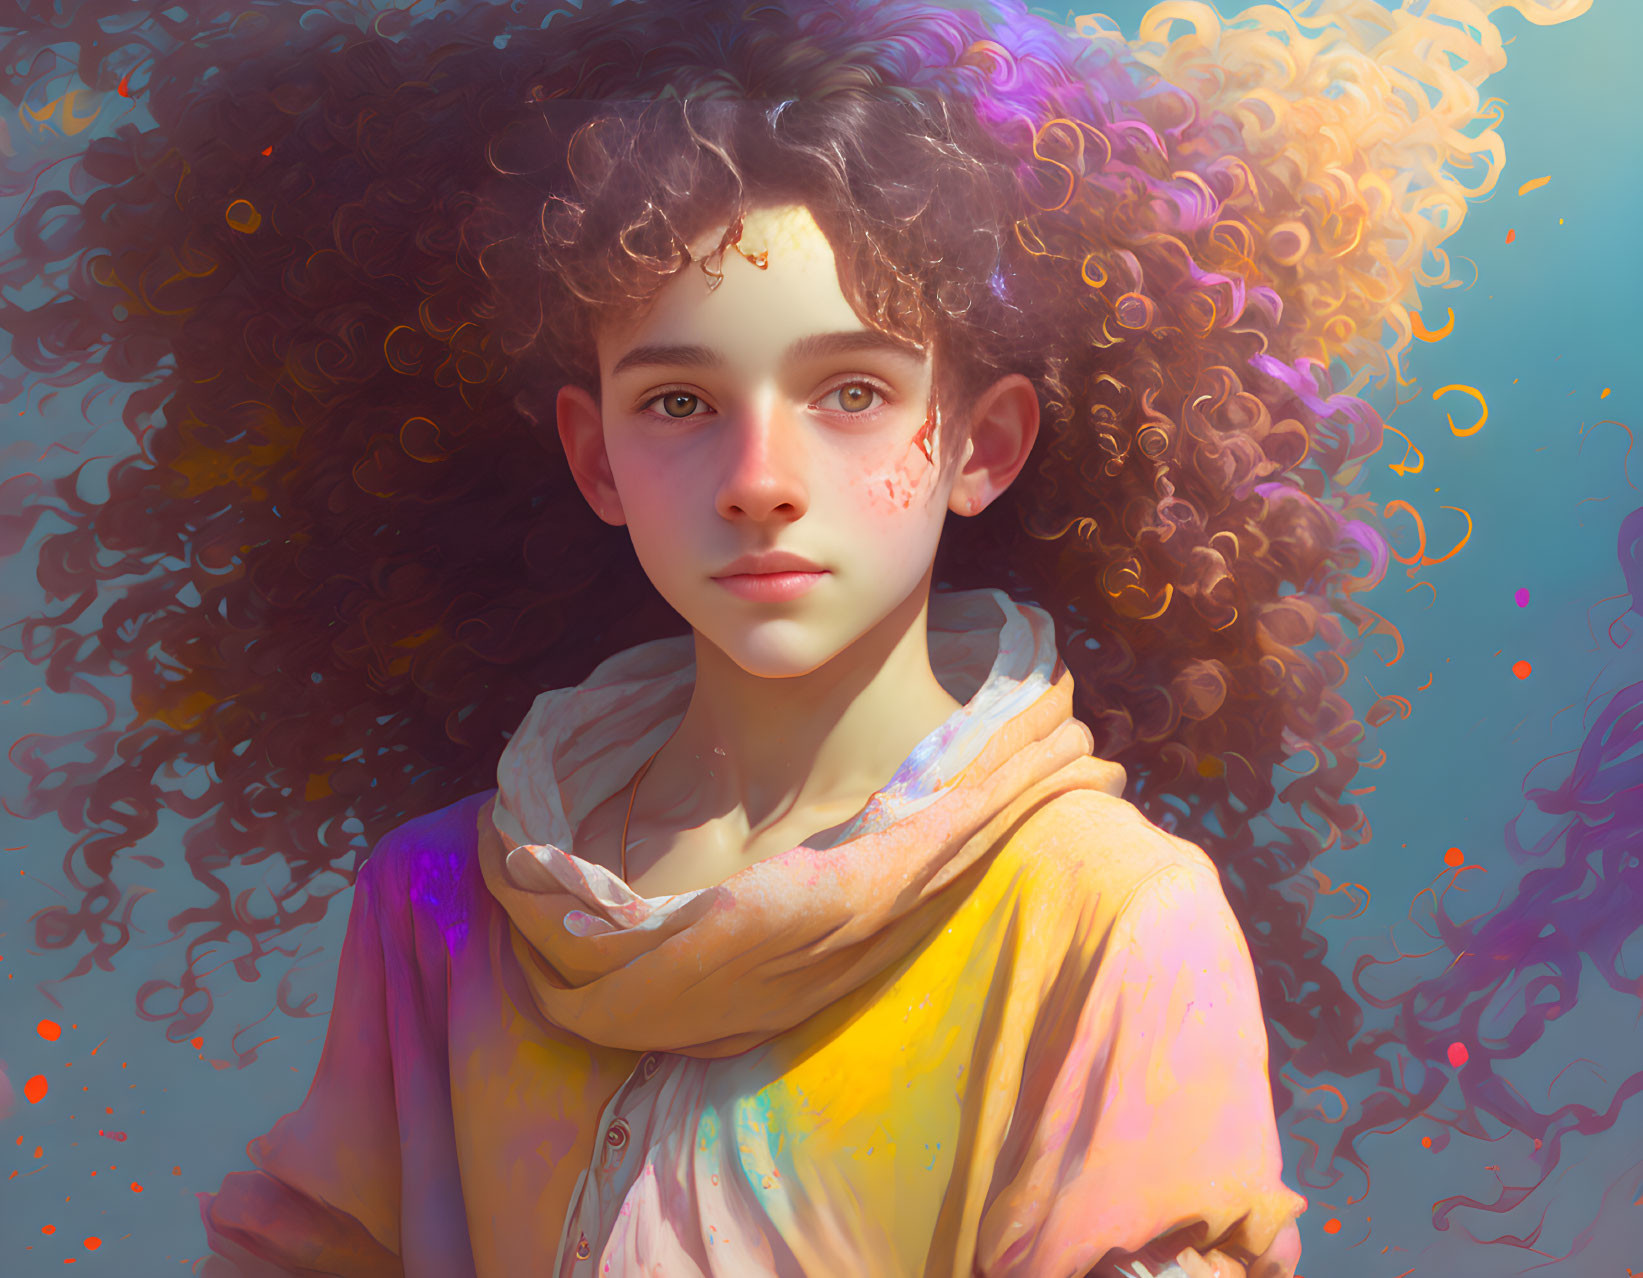 Voluminous Curly Hair Young Person in Digital Illustration